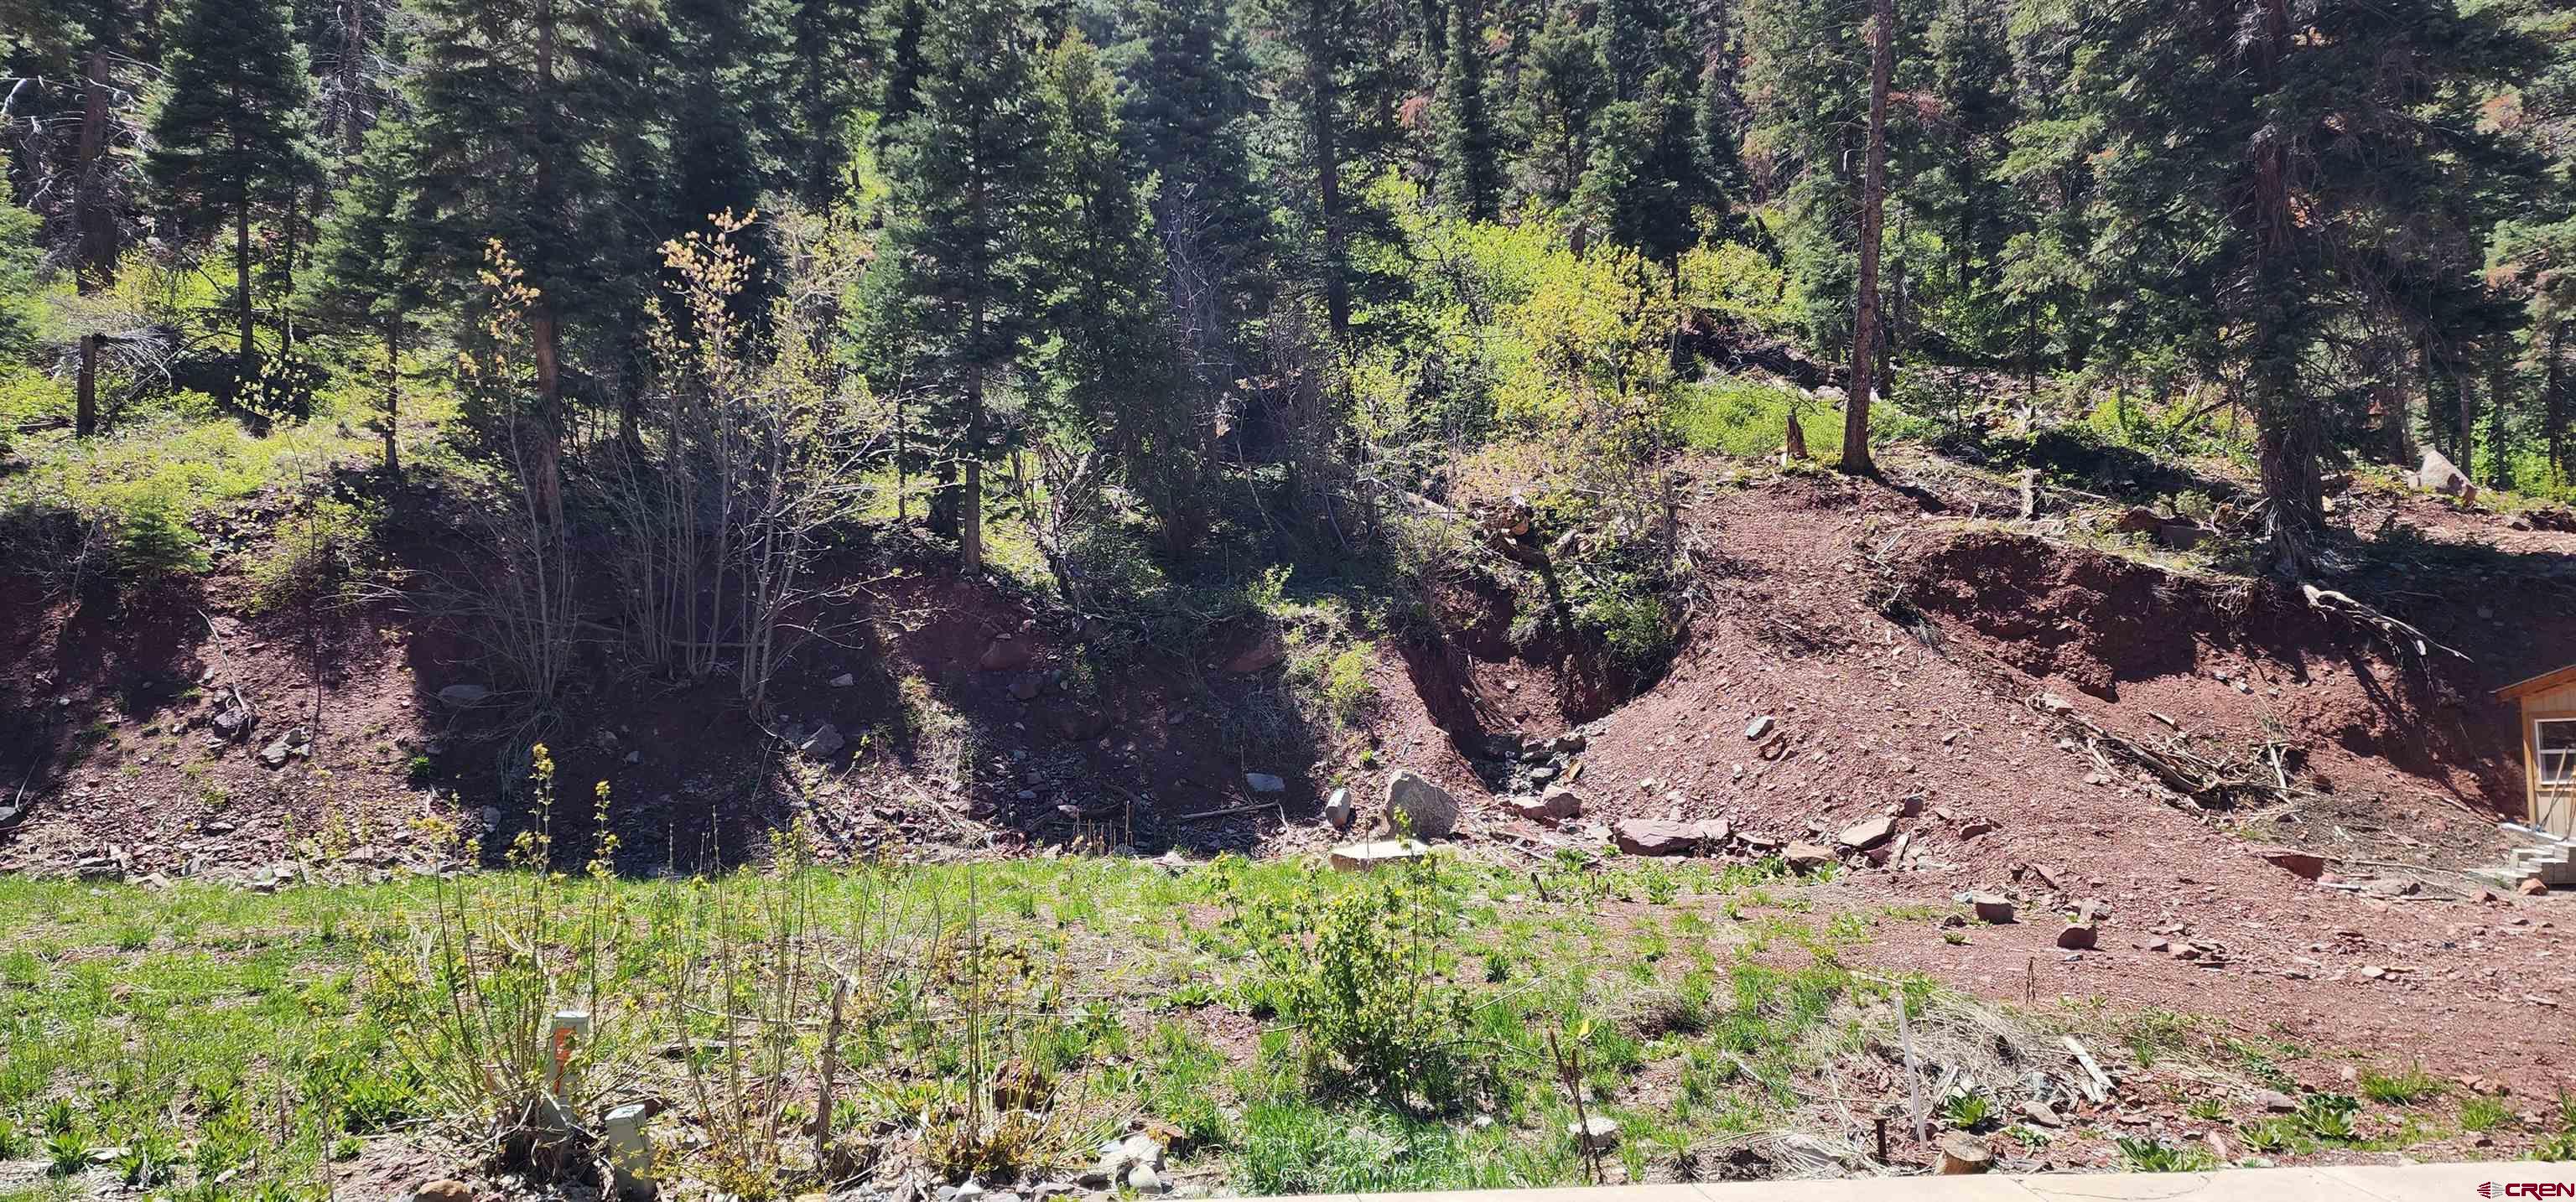 Ready to build lot in the resort City of Ouray. All utilities at the lot line. Property backs to National Forest with easy access to the Silver Shield trail. Unique views of old mining structures on the mountain side. Walk to town on the North Ouray Corridor trail loop along the Uncompahgre River. Zoning allows single family, multi-family, guest residence and other uses.